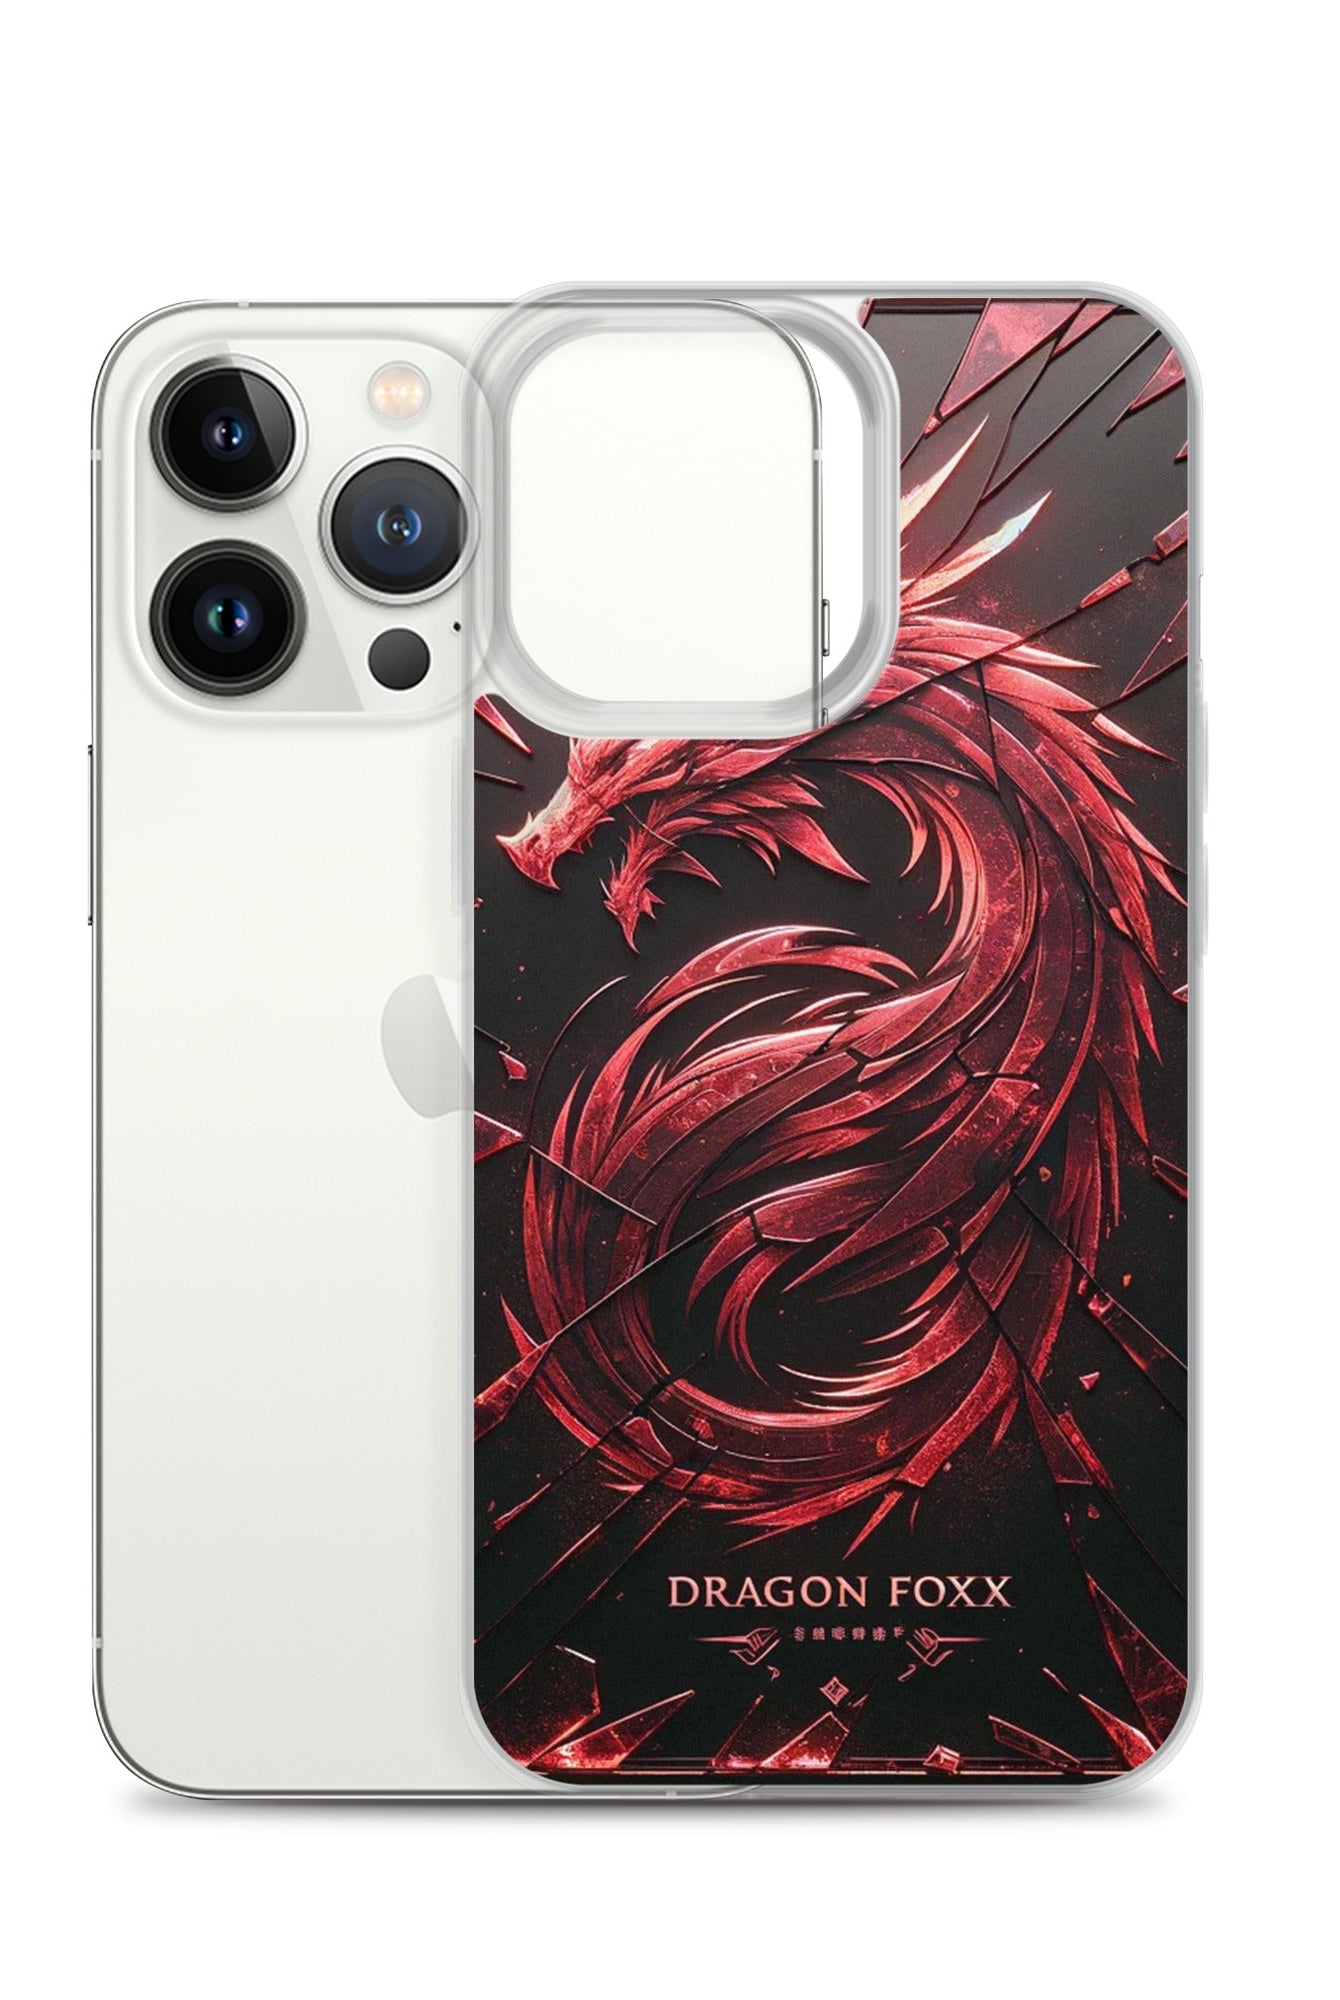 DRAGON FOXX™ Red Dragon Phone Case for iPhone® - Phone Case for iPhone® - DRAGON FOXX™ - DRAGON FOXX™ Red Dragon Phone Case for iPhone® - 7805351_13800 - iPhone 13 Pro - Red/Black/Clear - Accessories - Dragon Foxx™ - DRAGON FOXX™ Phone Case for iPhone®